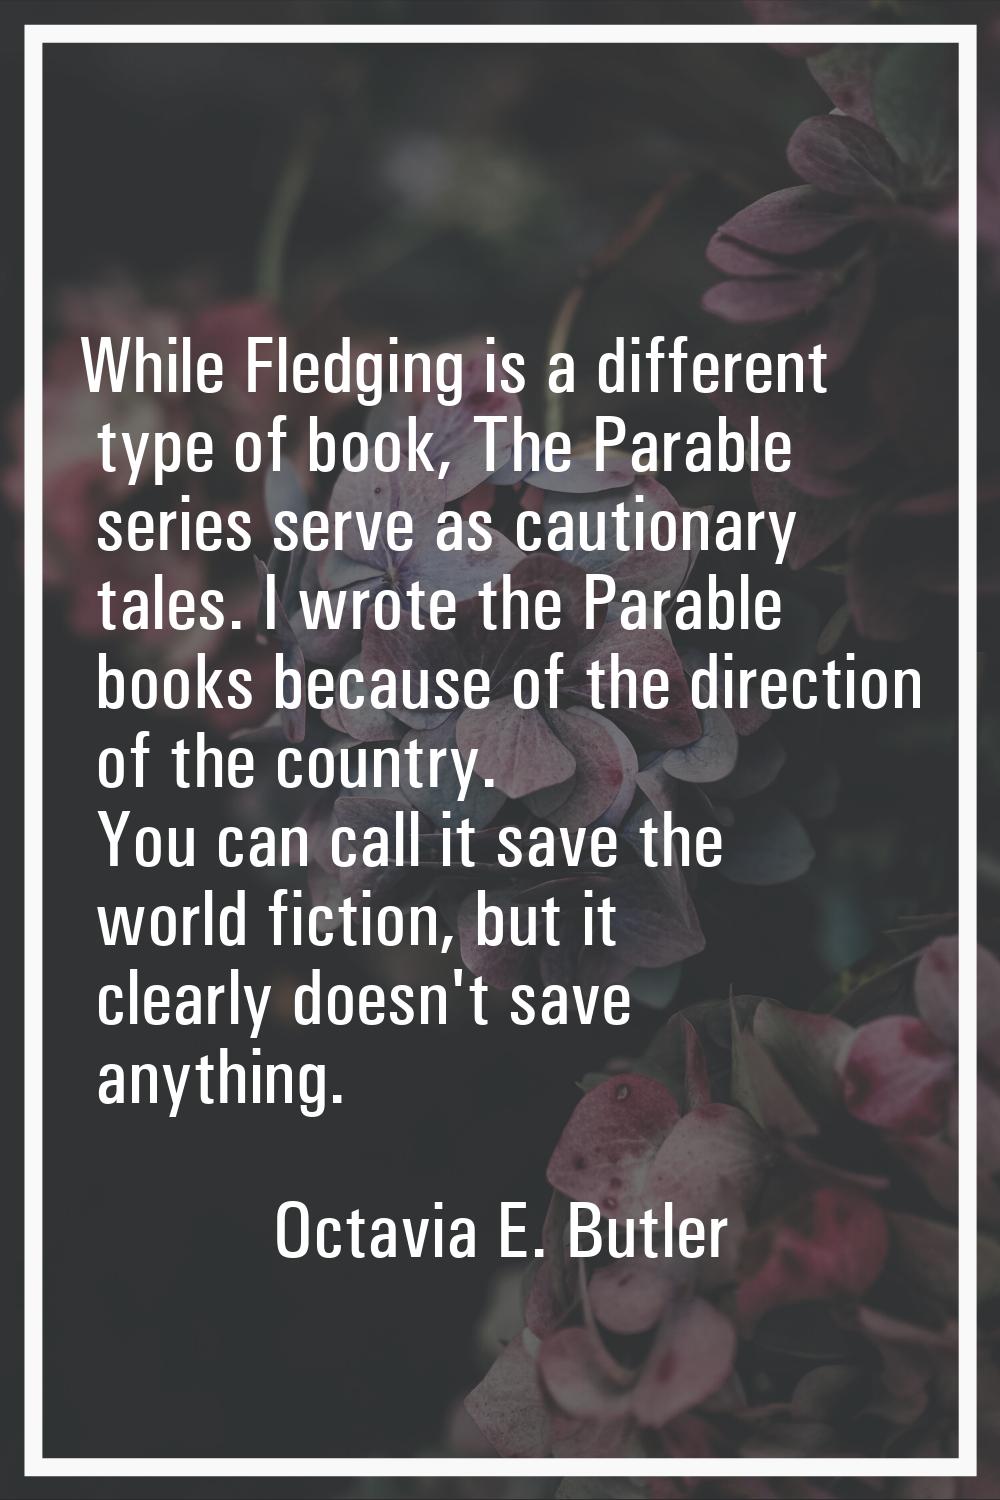 While Fledging is a different type of book, The Parable series serve as cautionary tales. I wrote t